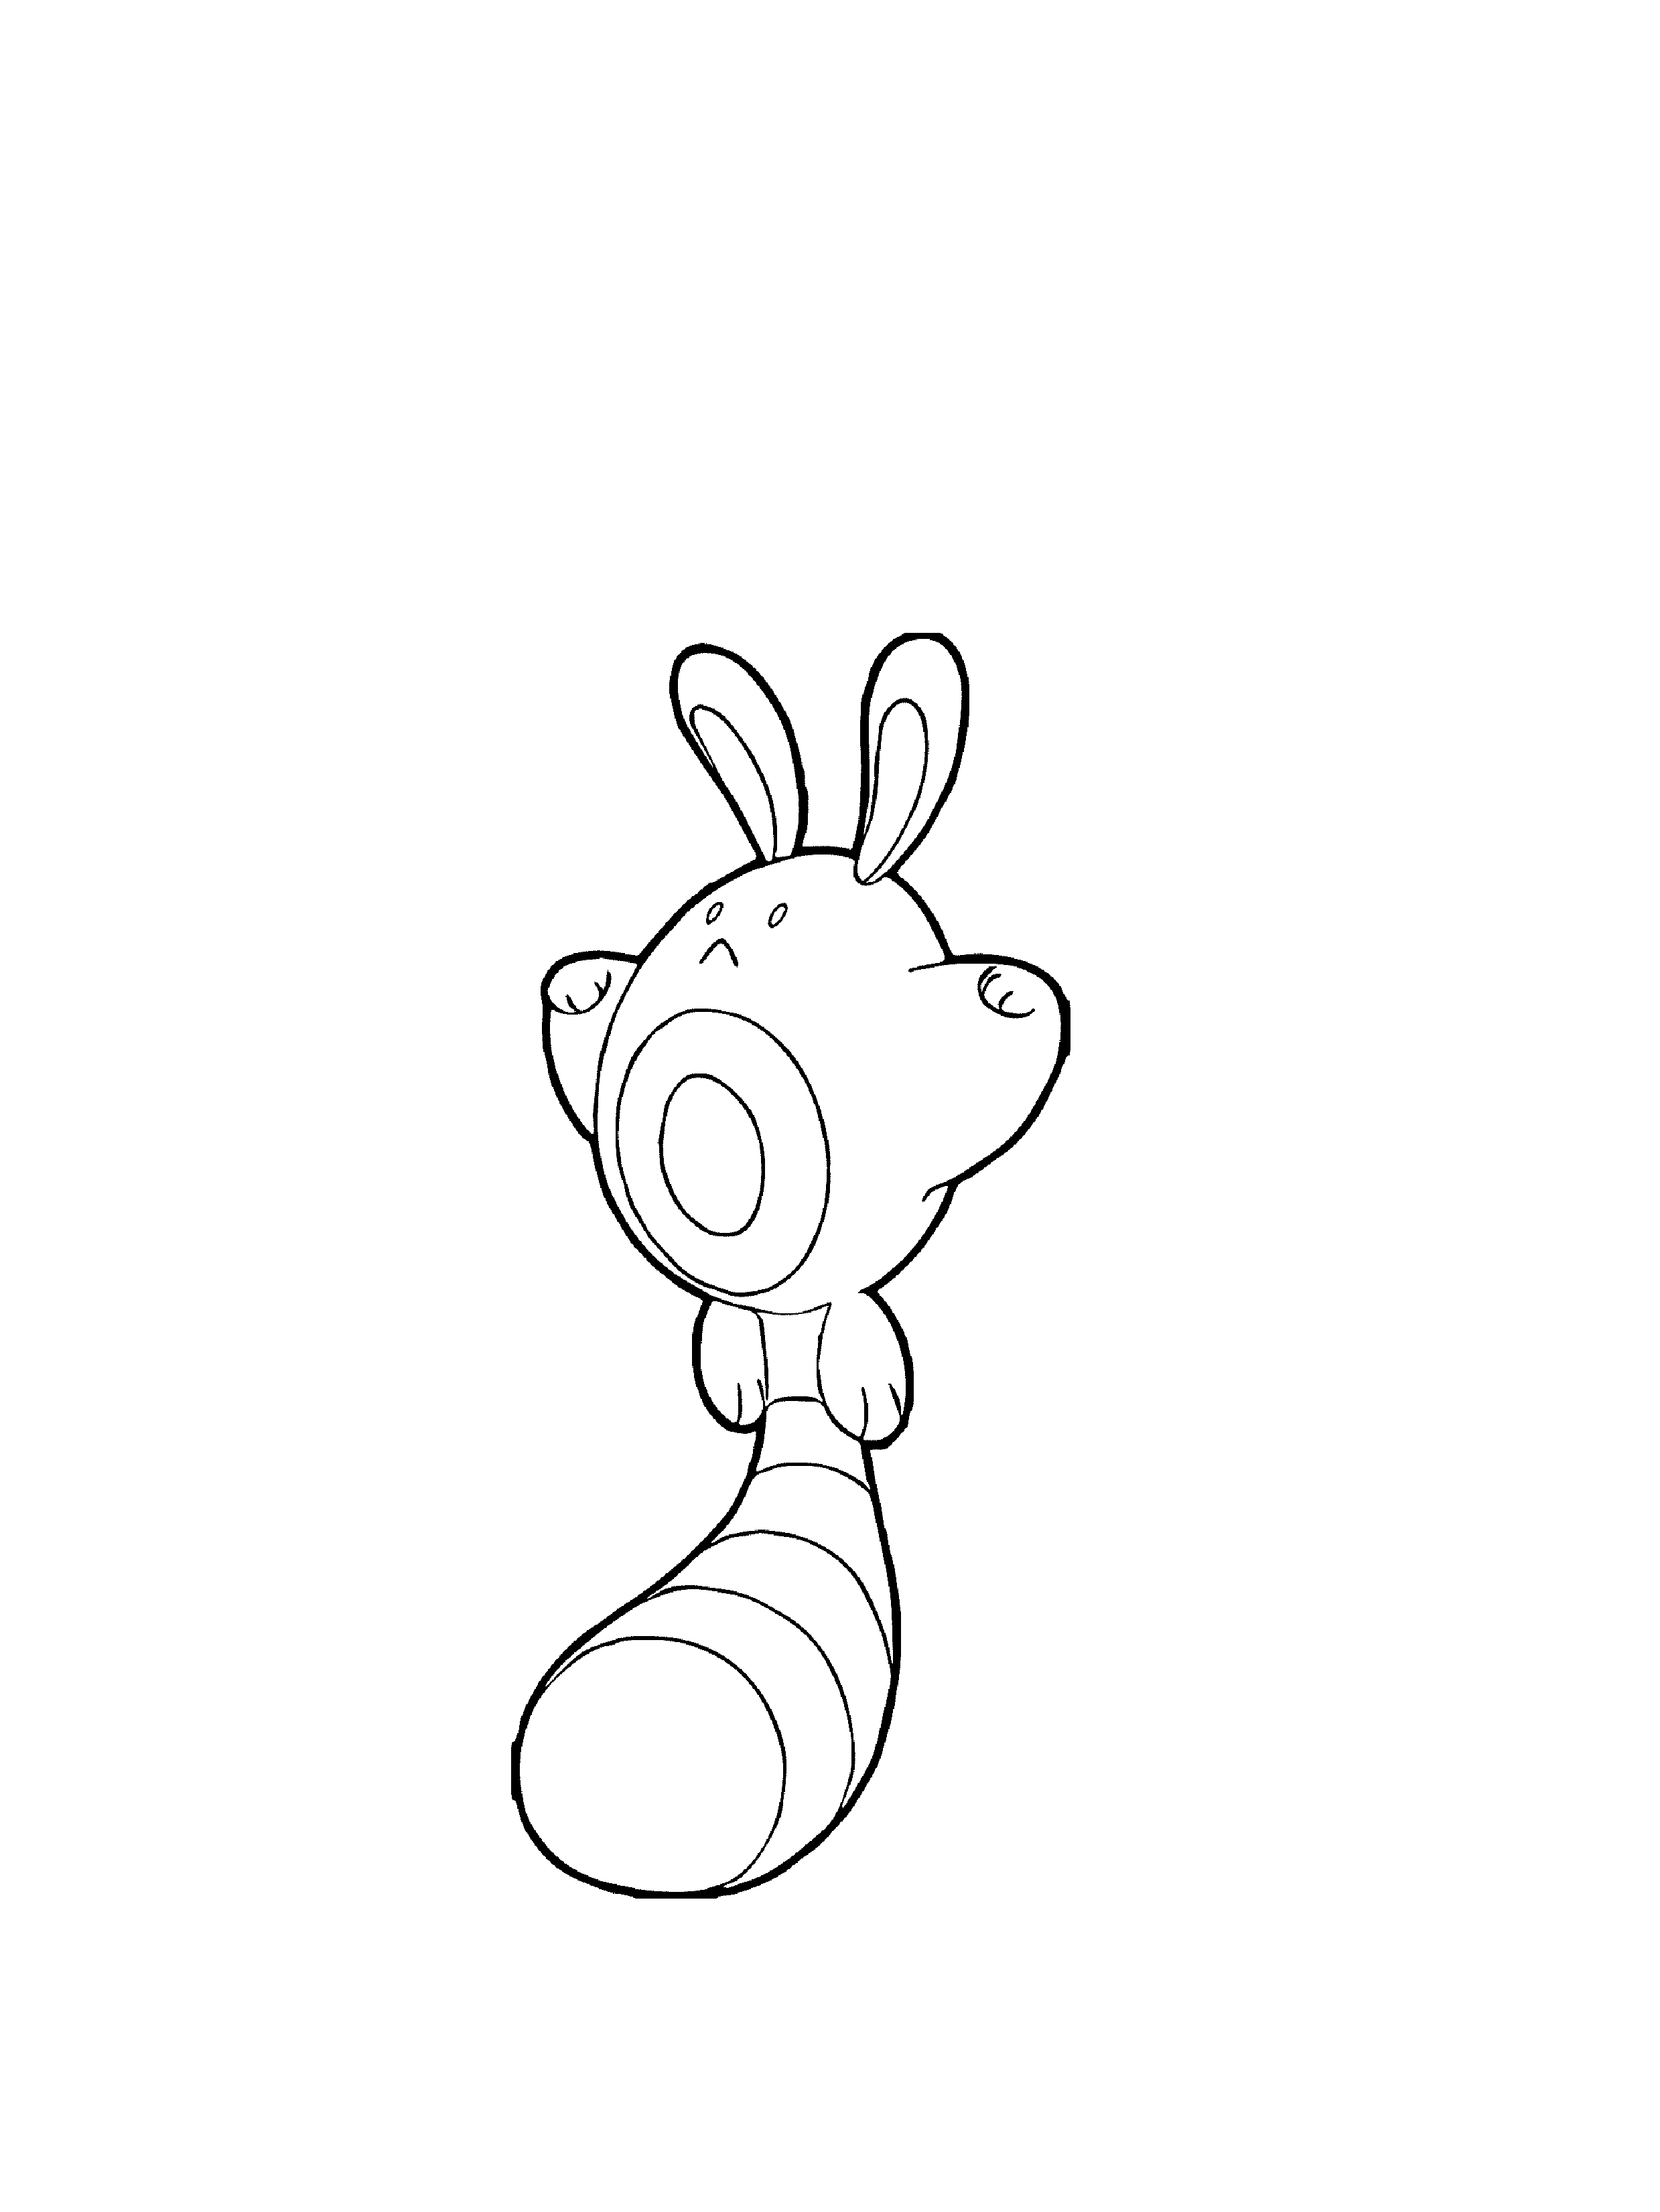 Sentret Coloring Pages 1